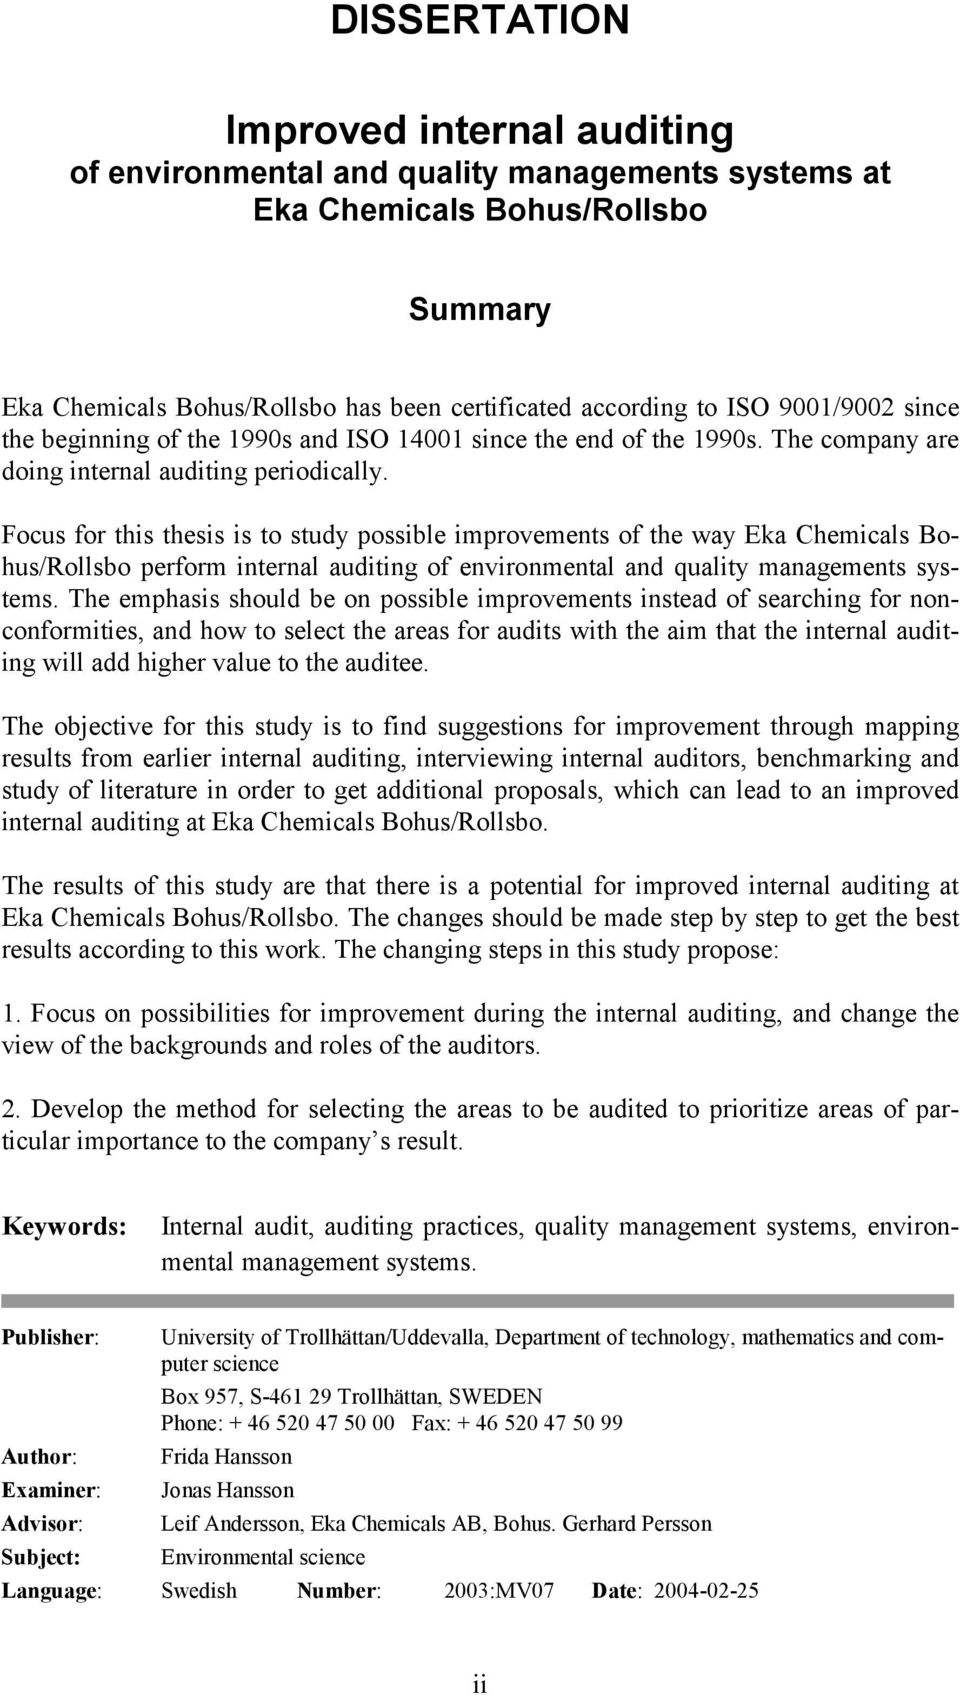 Focus for this thesis is to study possible improvements of the way Eka Chemicals Bohus/Rollsbo perform internal auditing of environmental and quality managements systems.